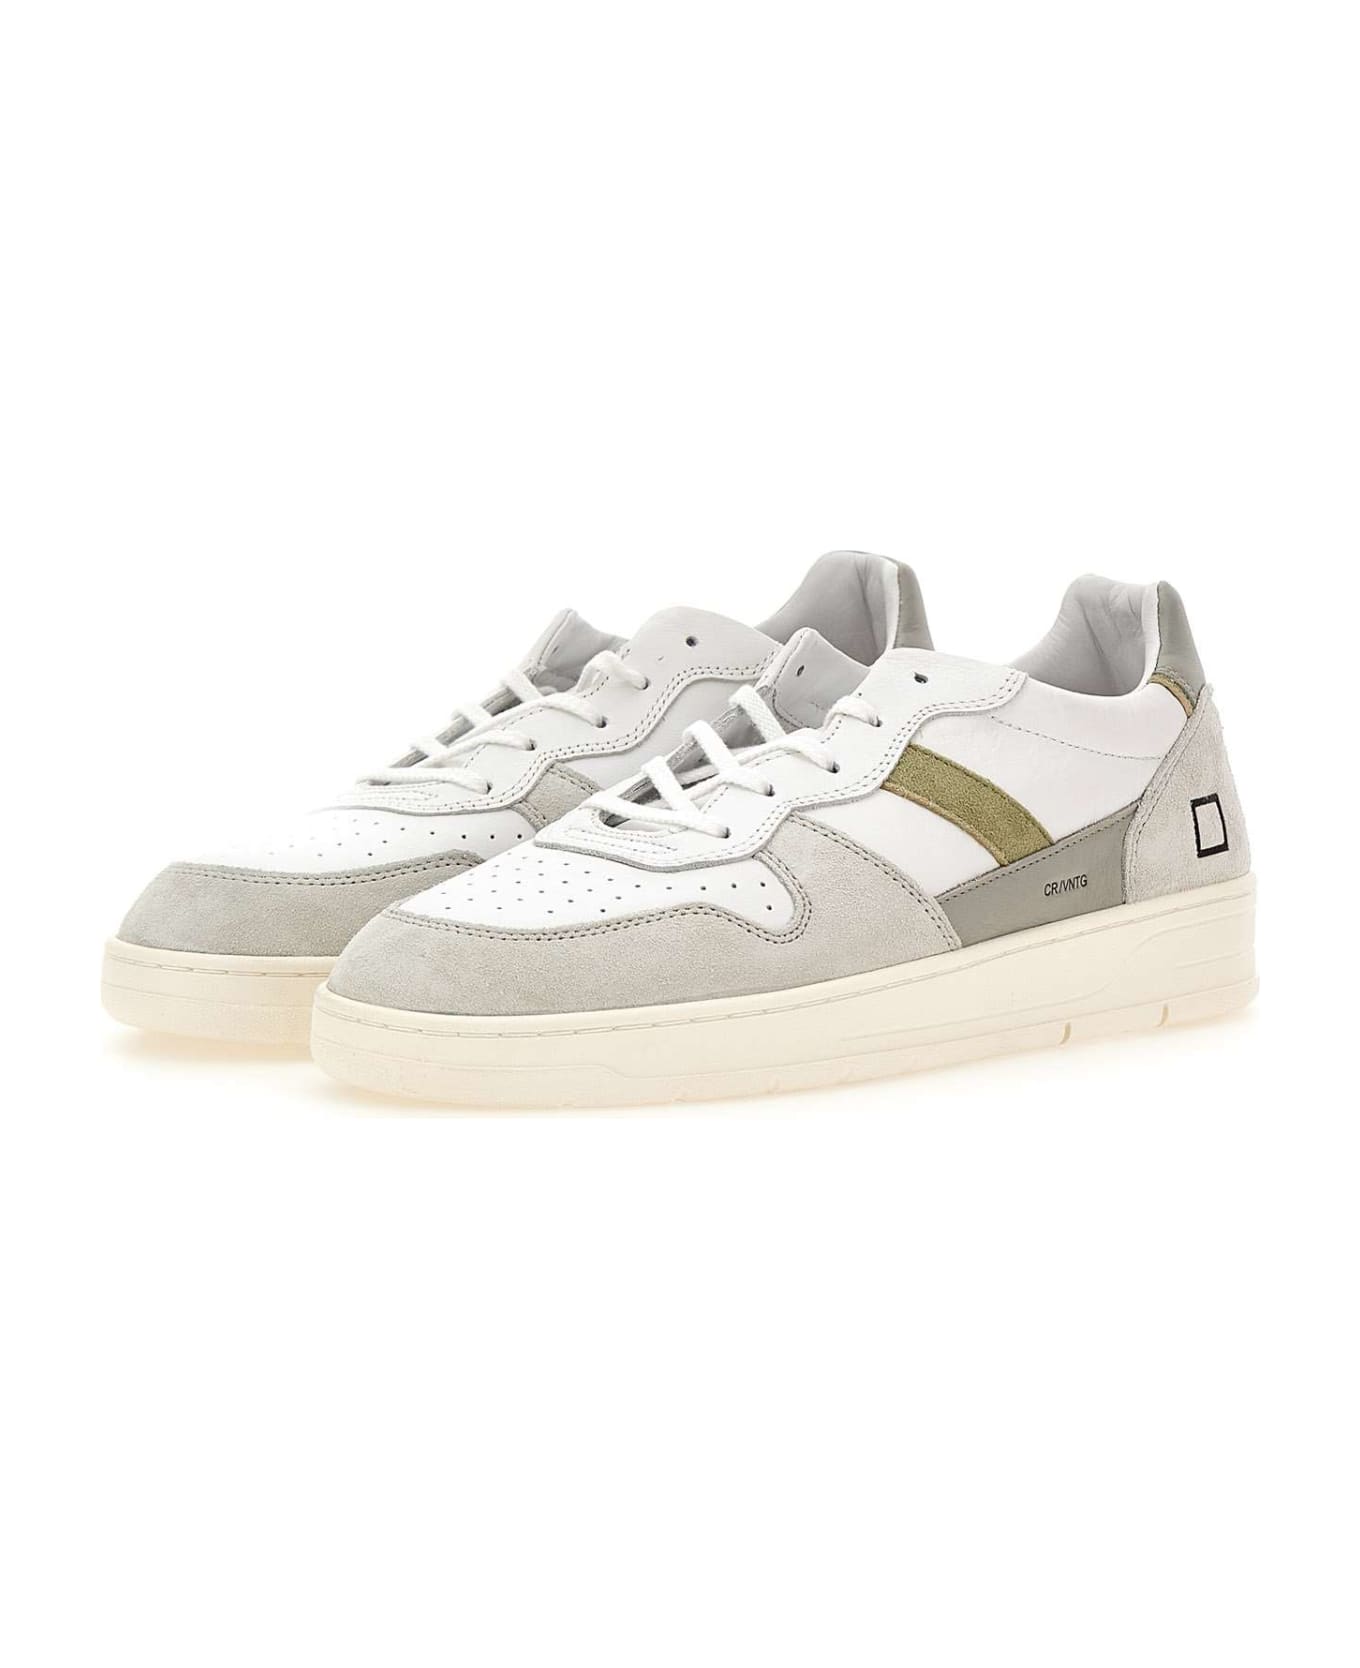 D.A.T.E. "court 2.0 Vintage" Leather Sneakers - WHITE